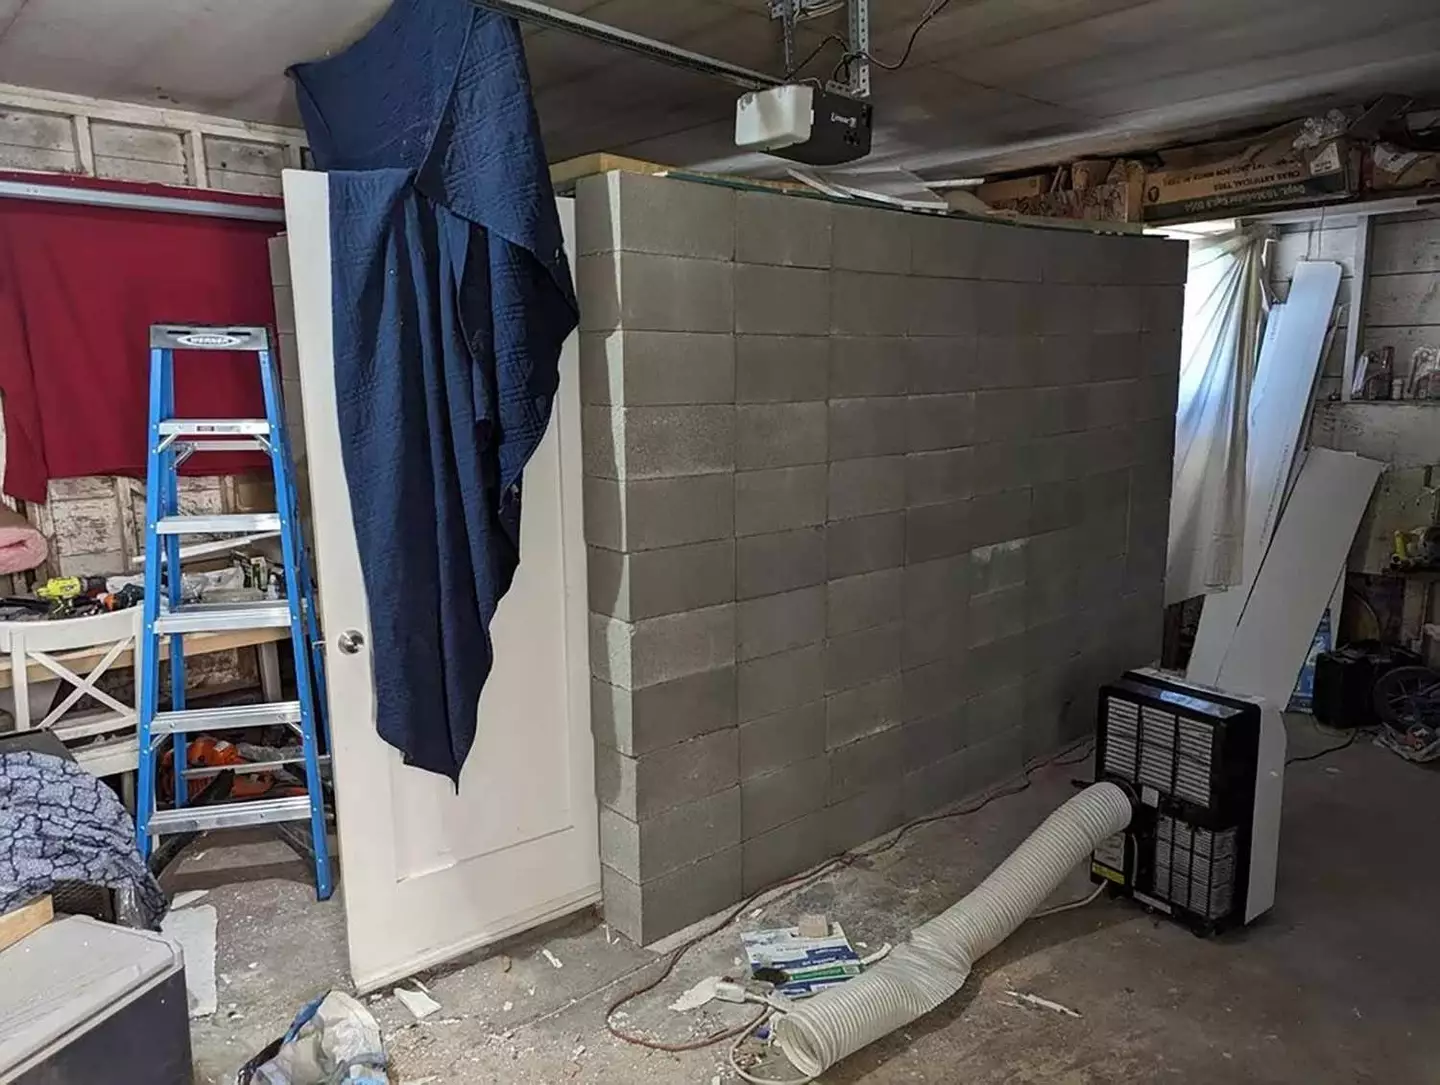 One of the reported survivors from Washington claimed she was kidnapped and locked in a cinderblock cell in the garage of the man’s Klamath Falls, Oregon property, where she was sexually assaulted.